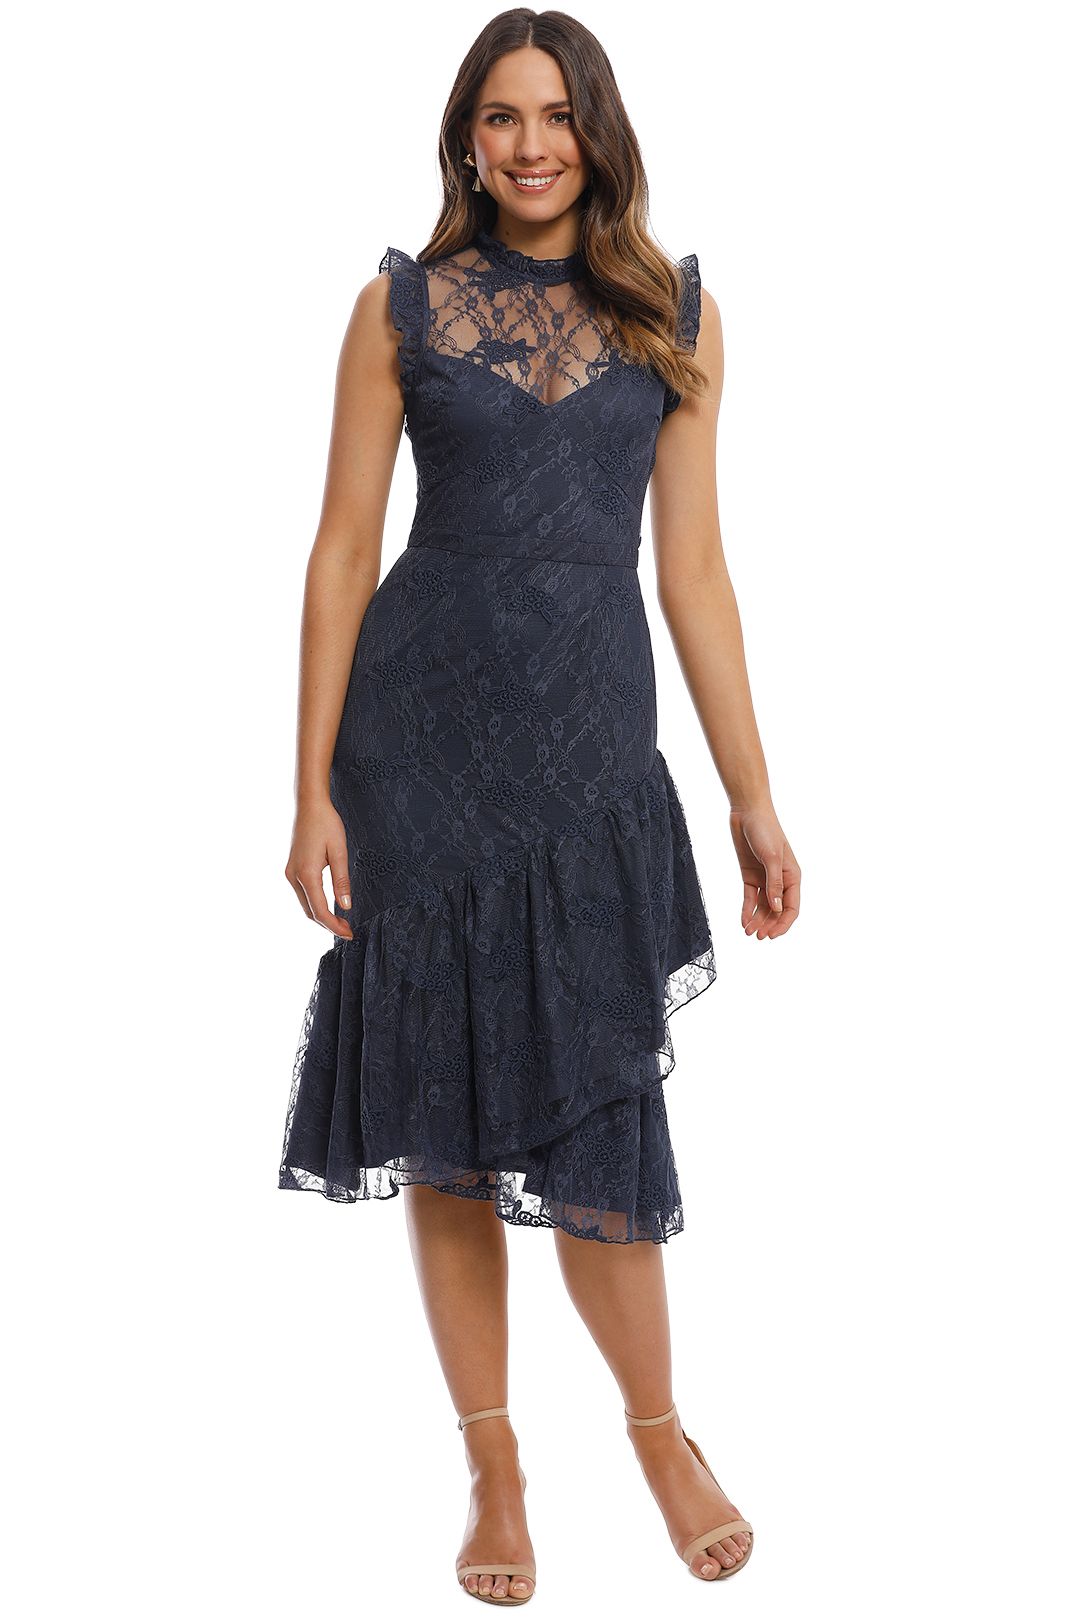 Cooper St - Peppermint Lace High Neck Dress - French Navy - Front